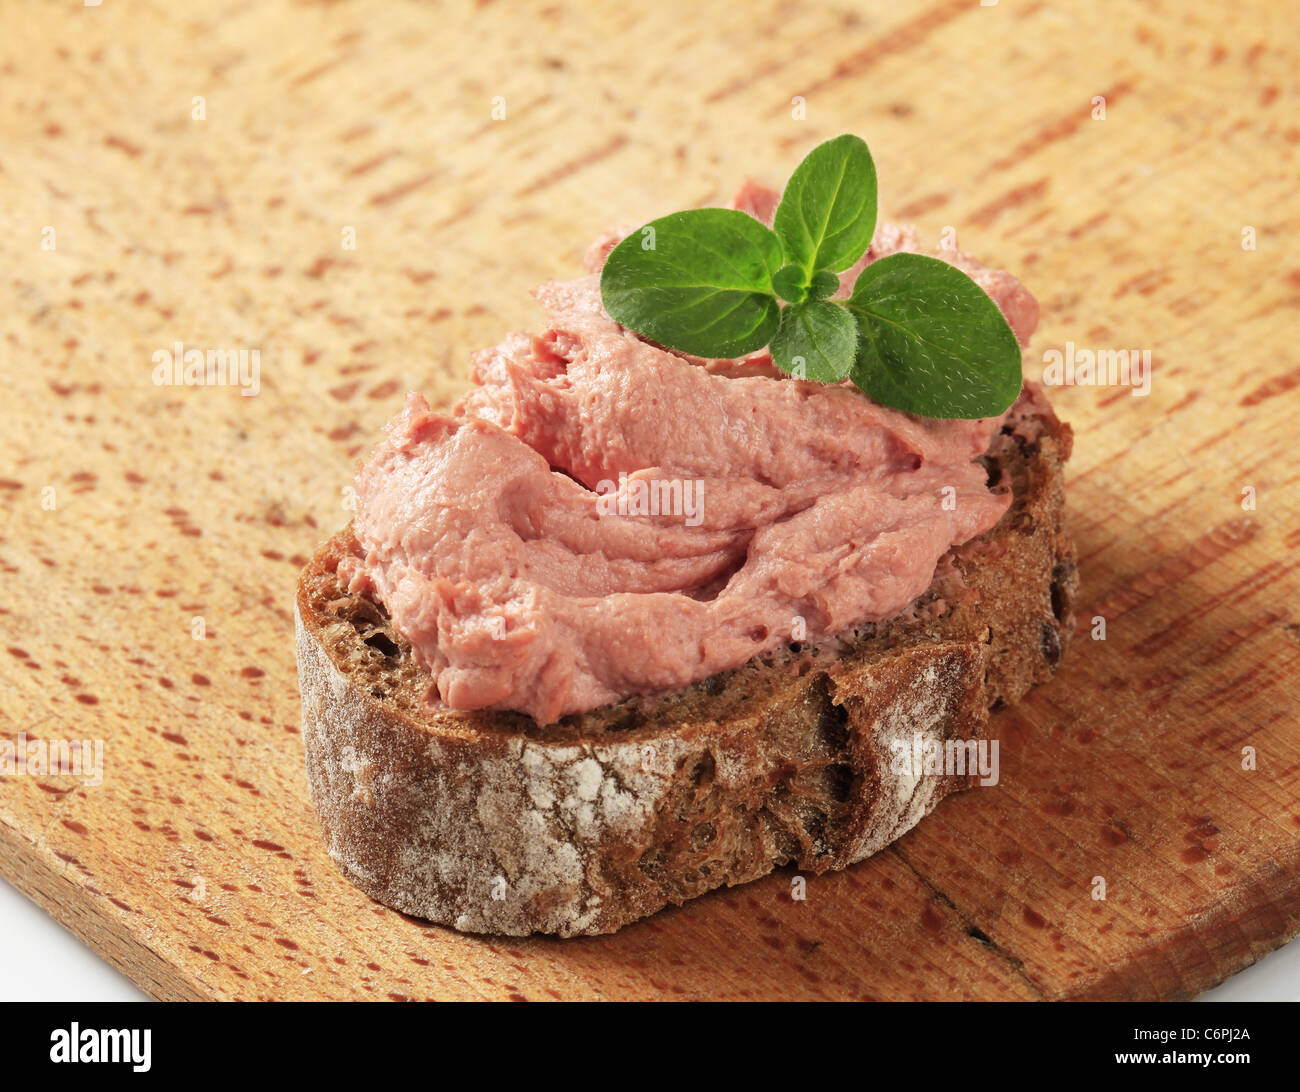 Slice of brown bread and smooth liver pate Stock Photo